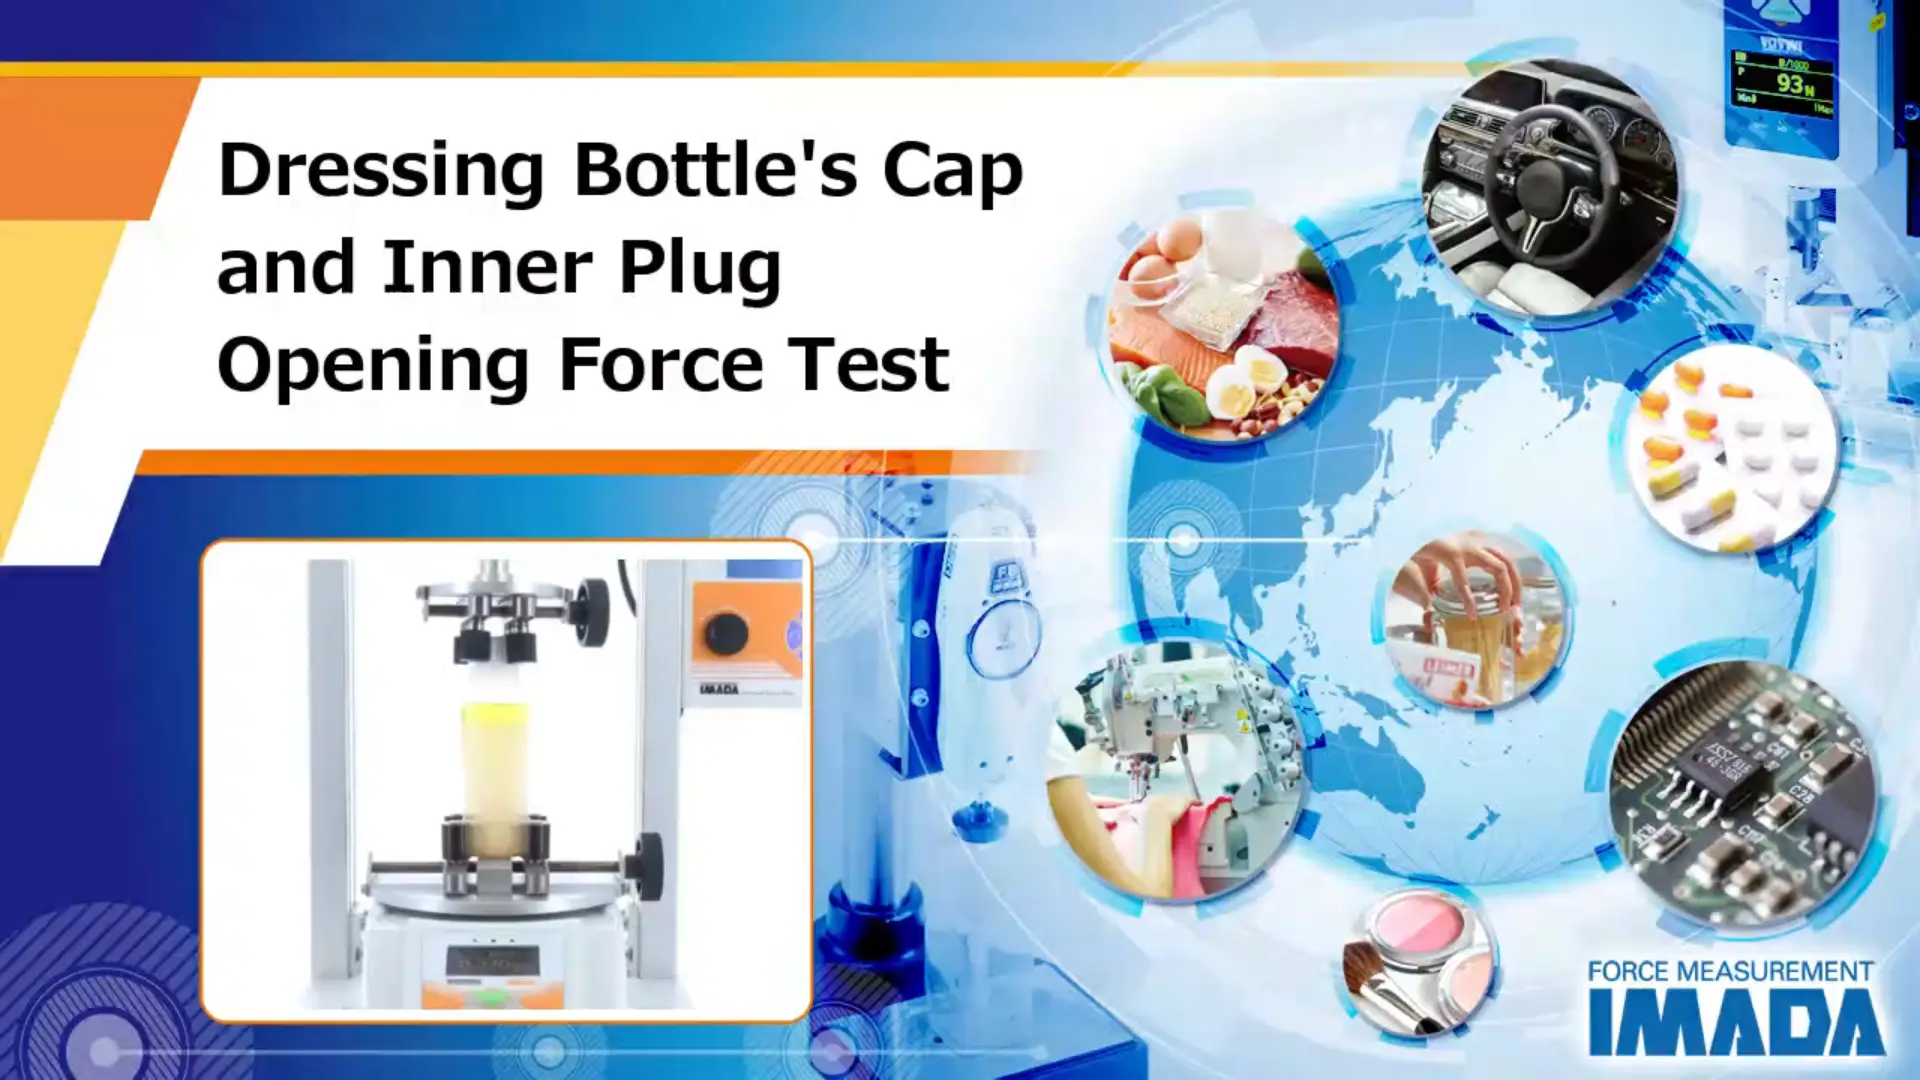 Dressing Bottle's Cap and Inner Plug Opening Force Test